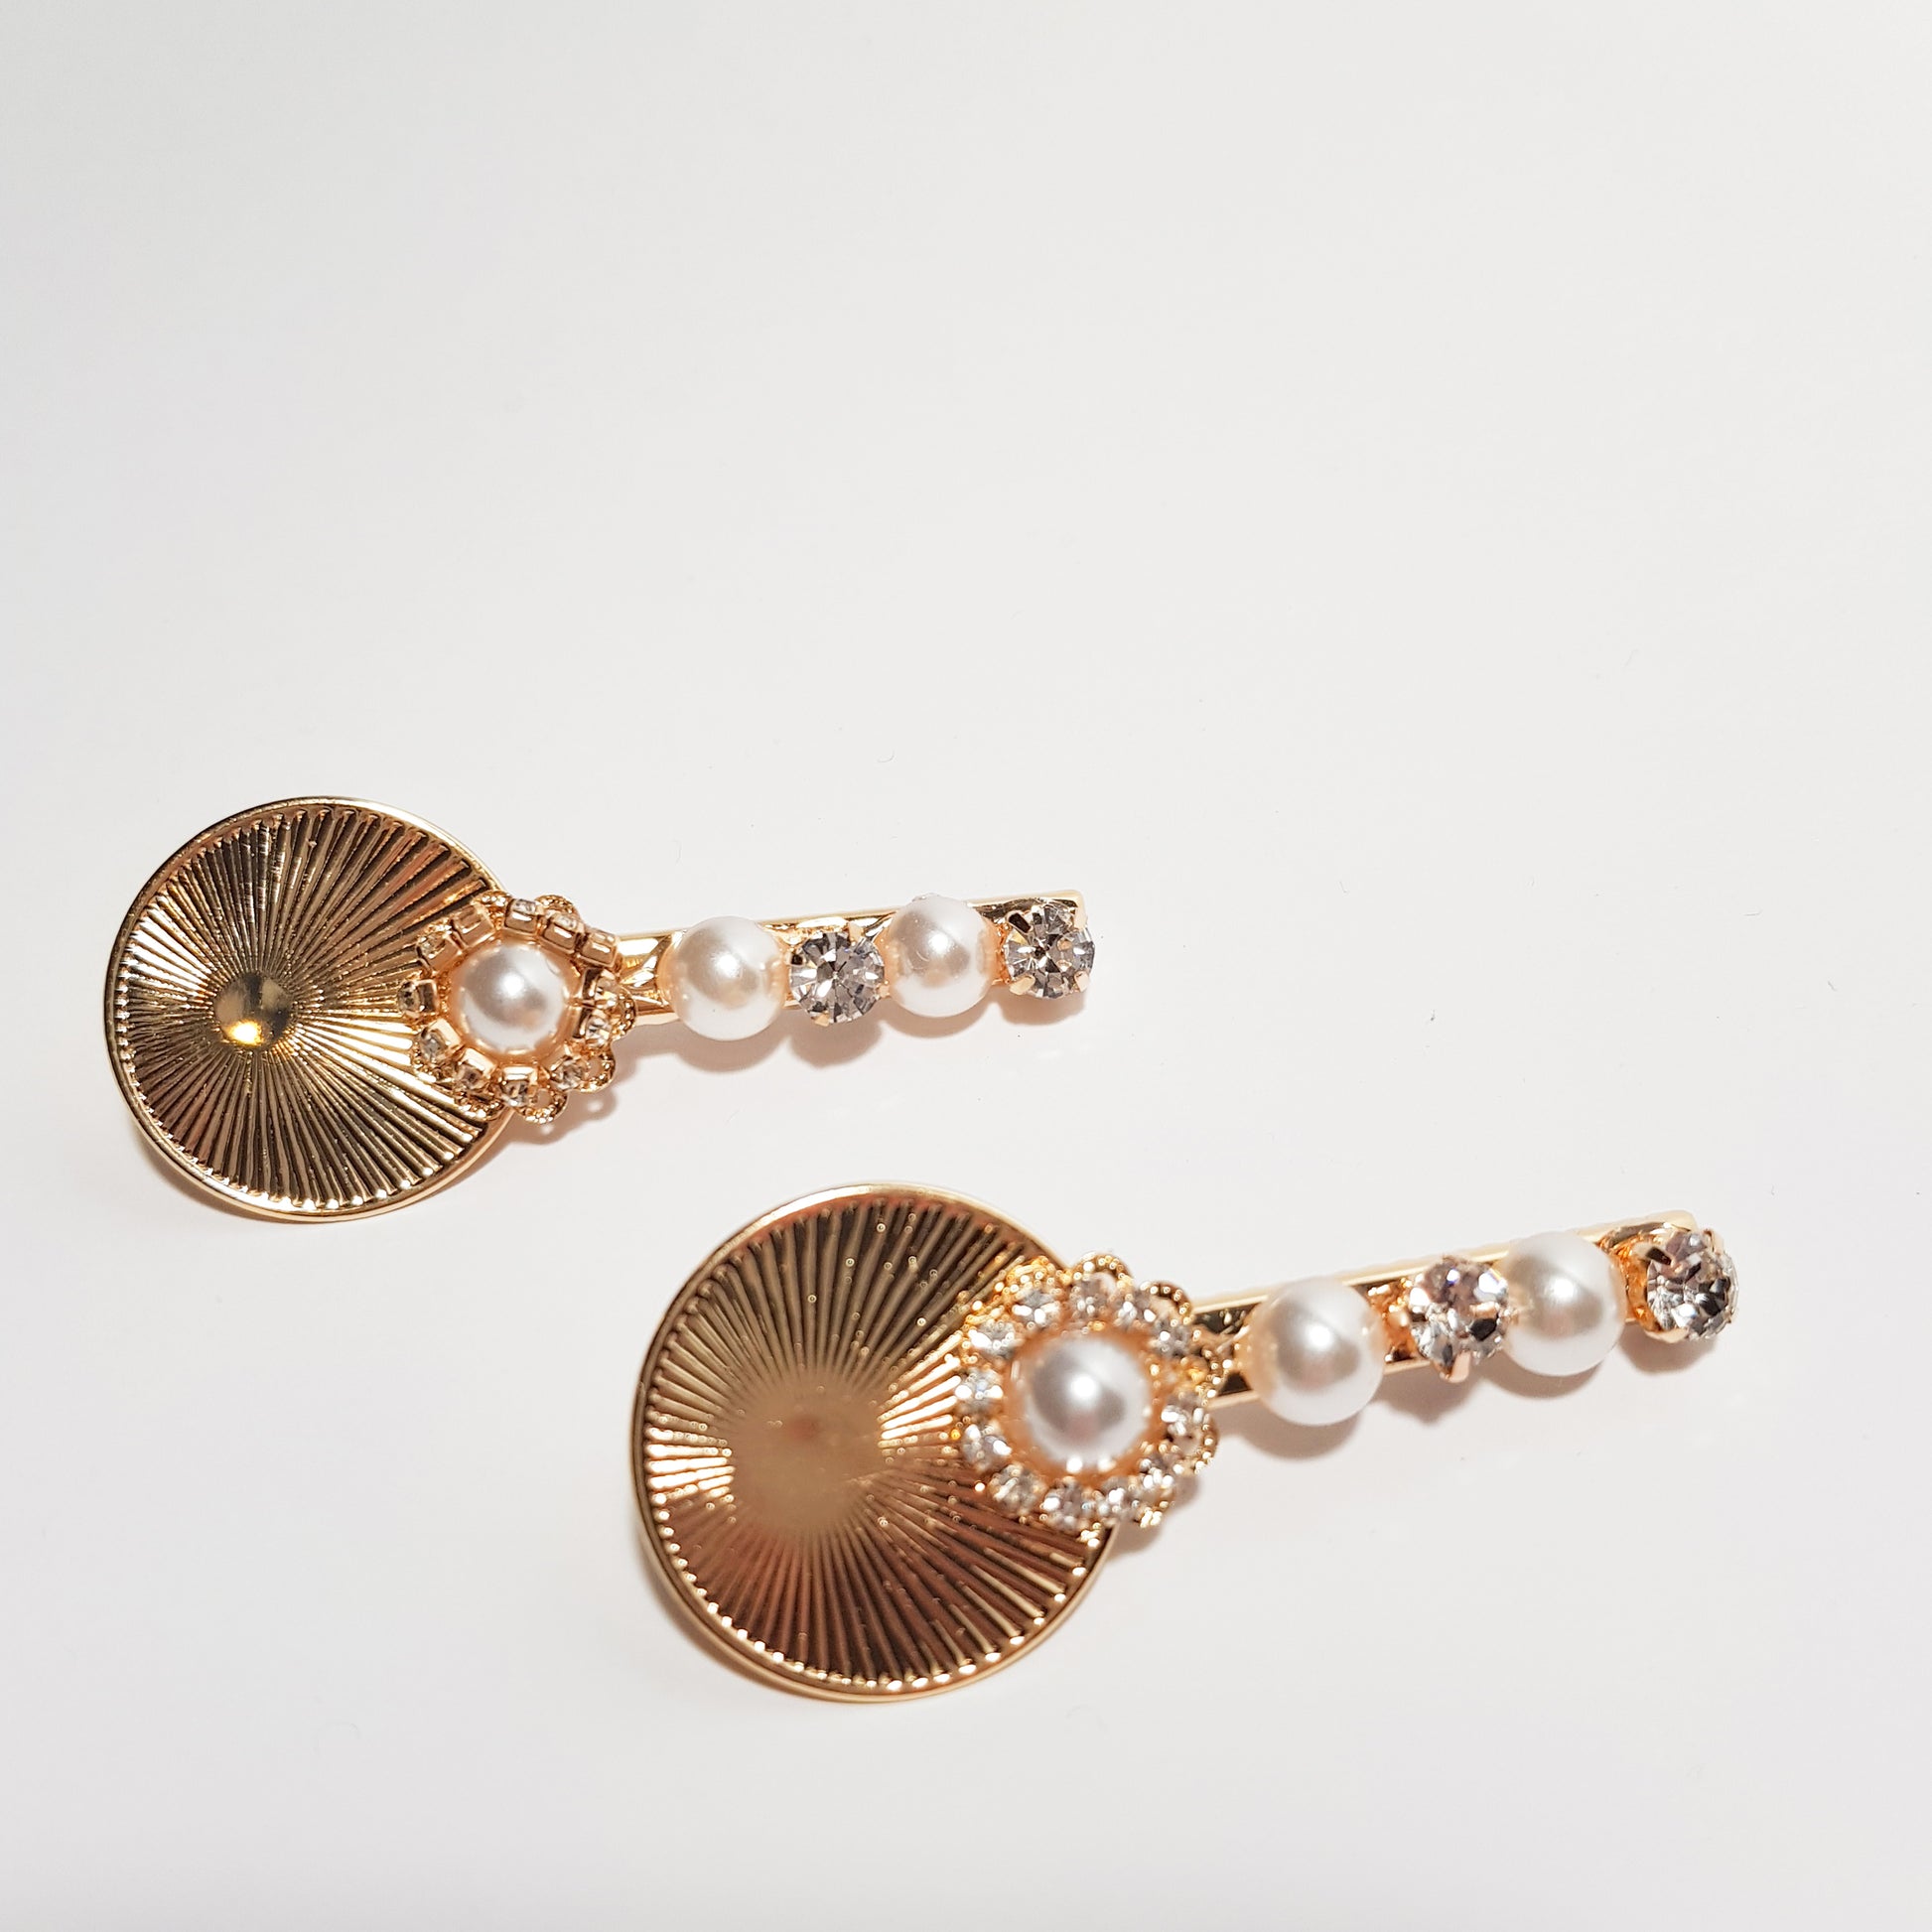 Gold and pearl hair clips